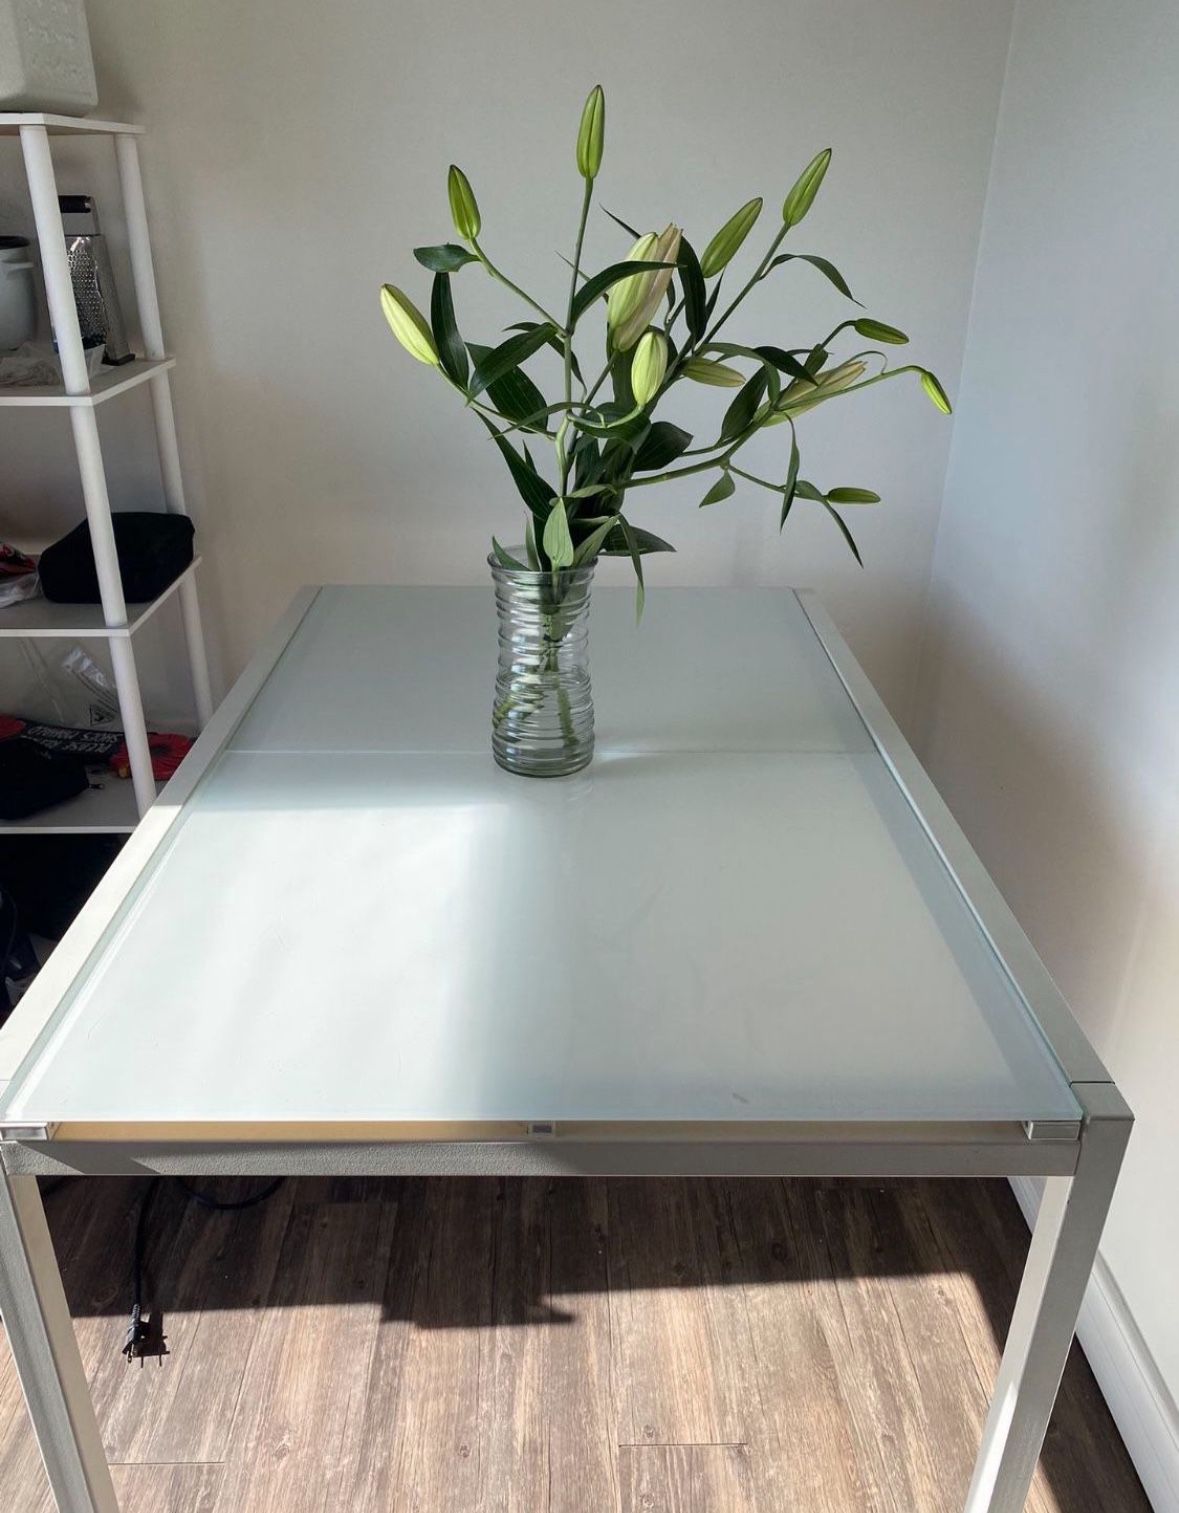 White Modern Dining Table